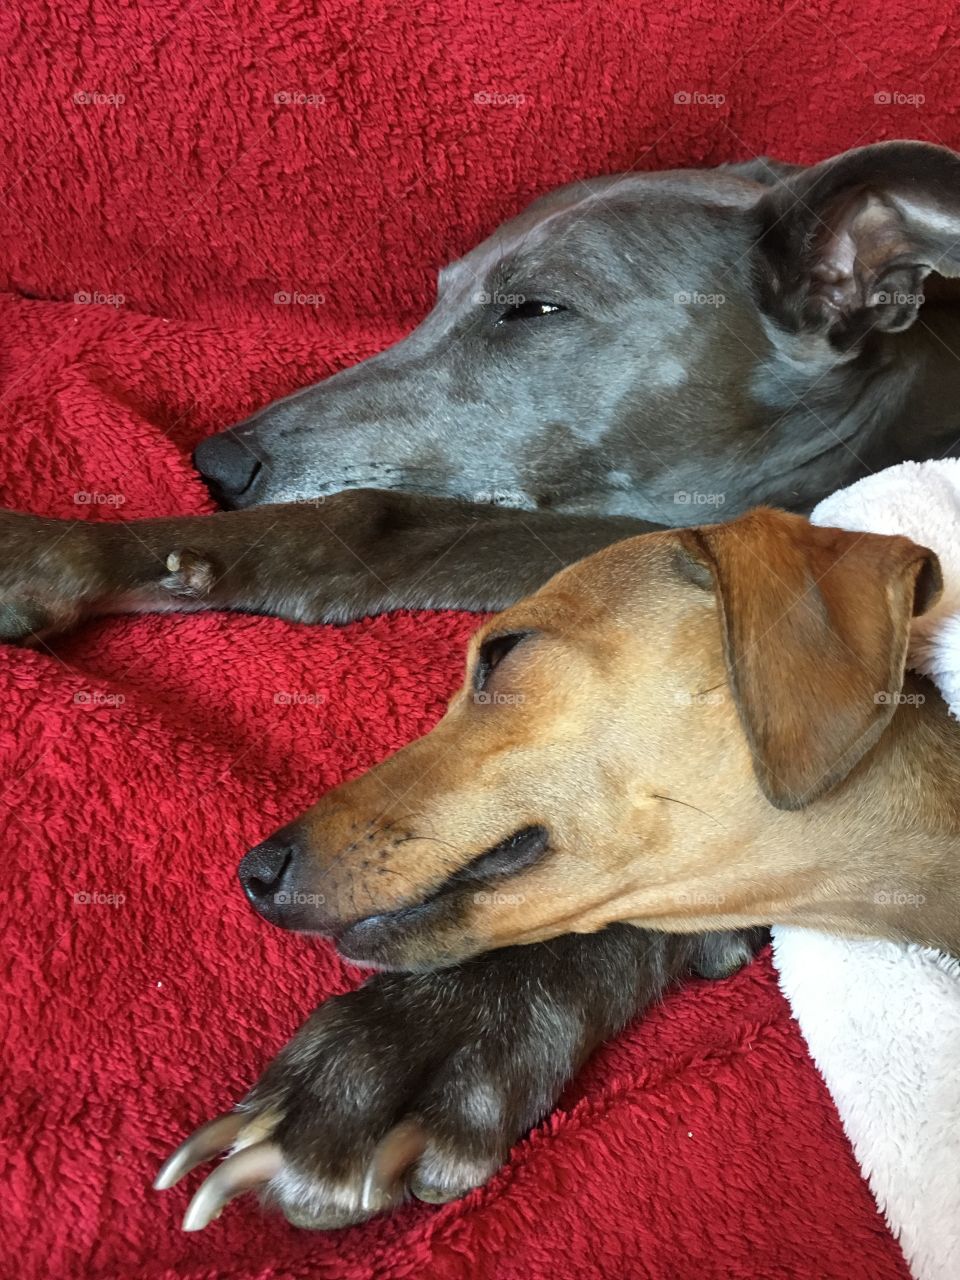 Amber the Italian greyhound puppy and Libby the blue whippet snuggled up laid on the sofa